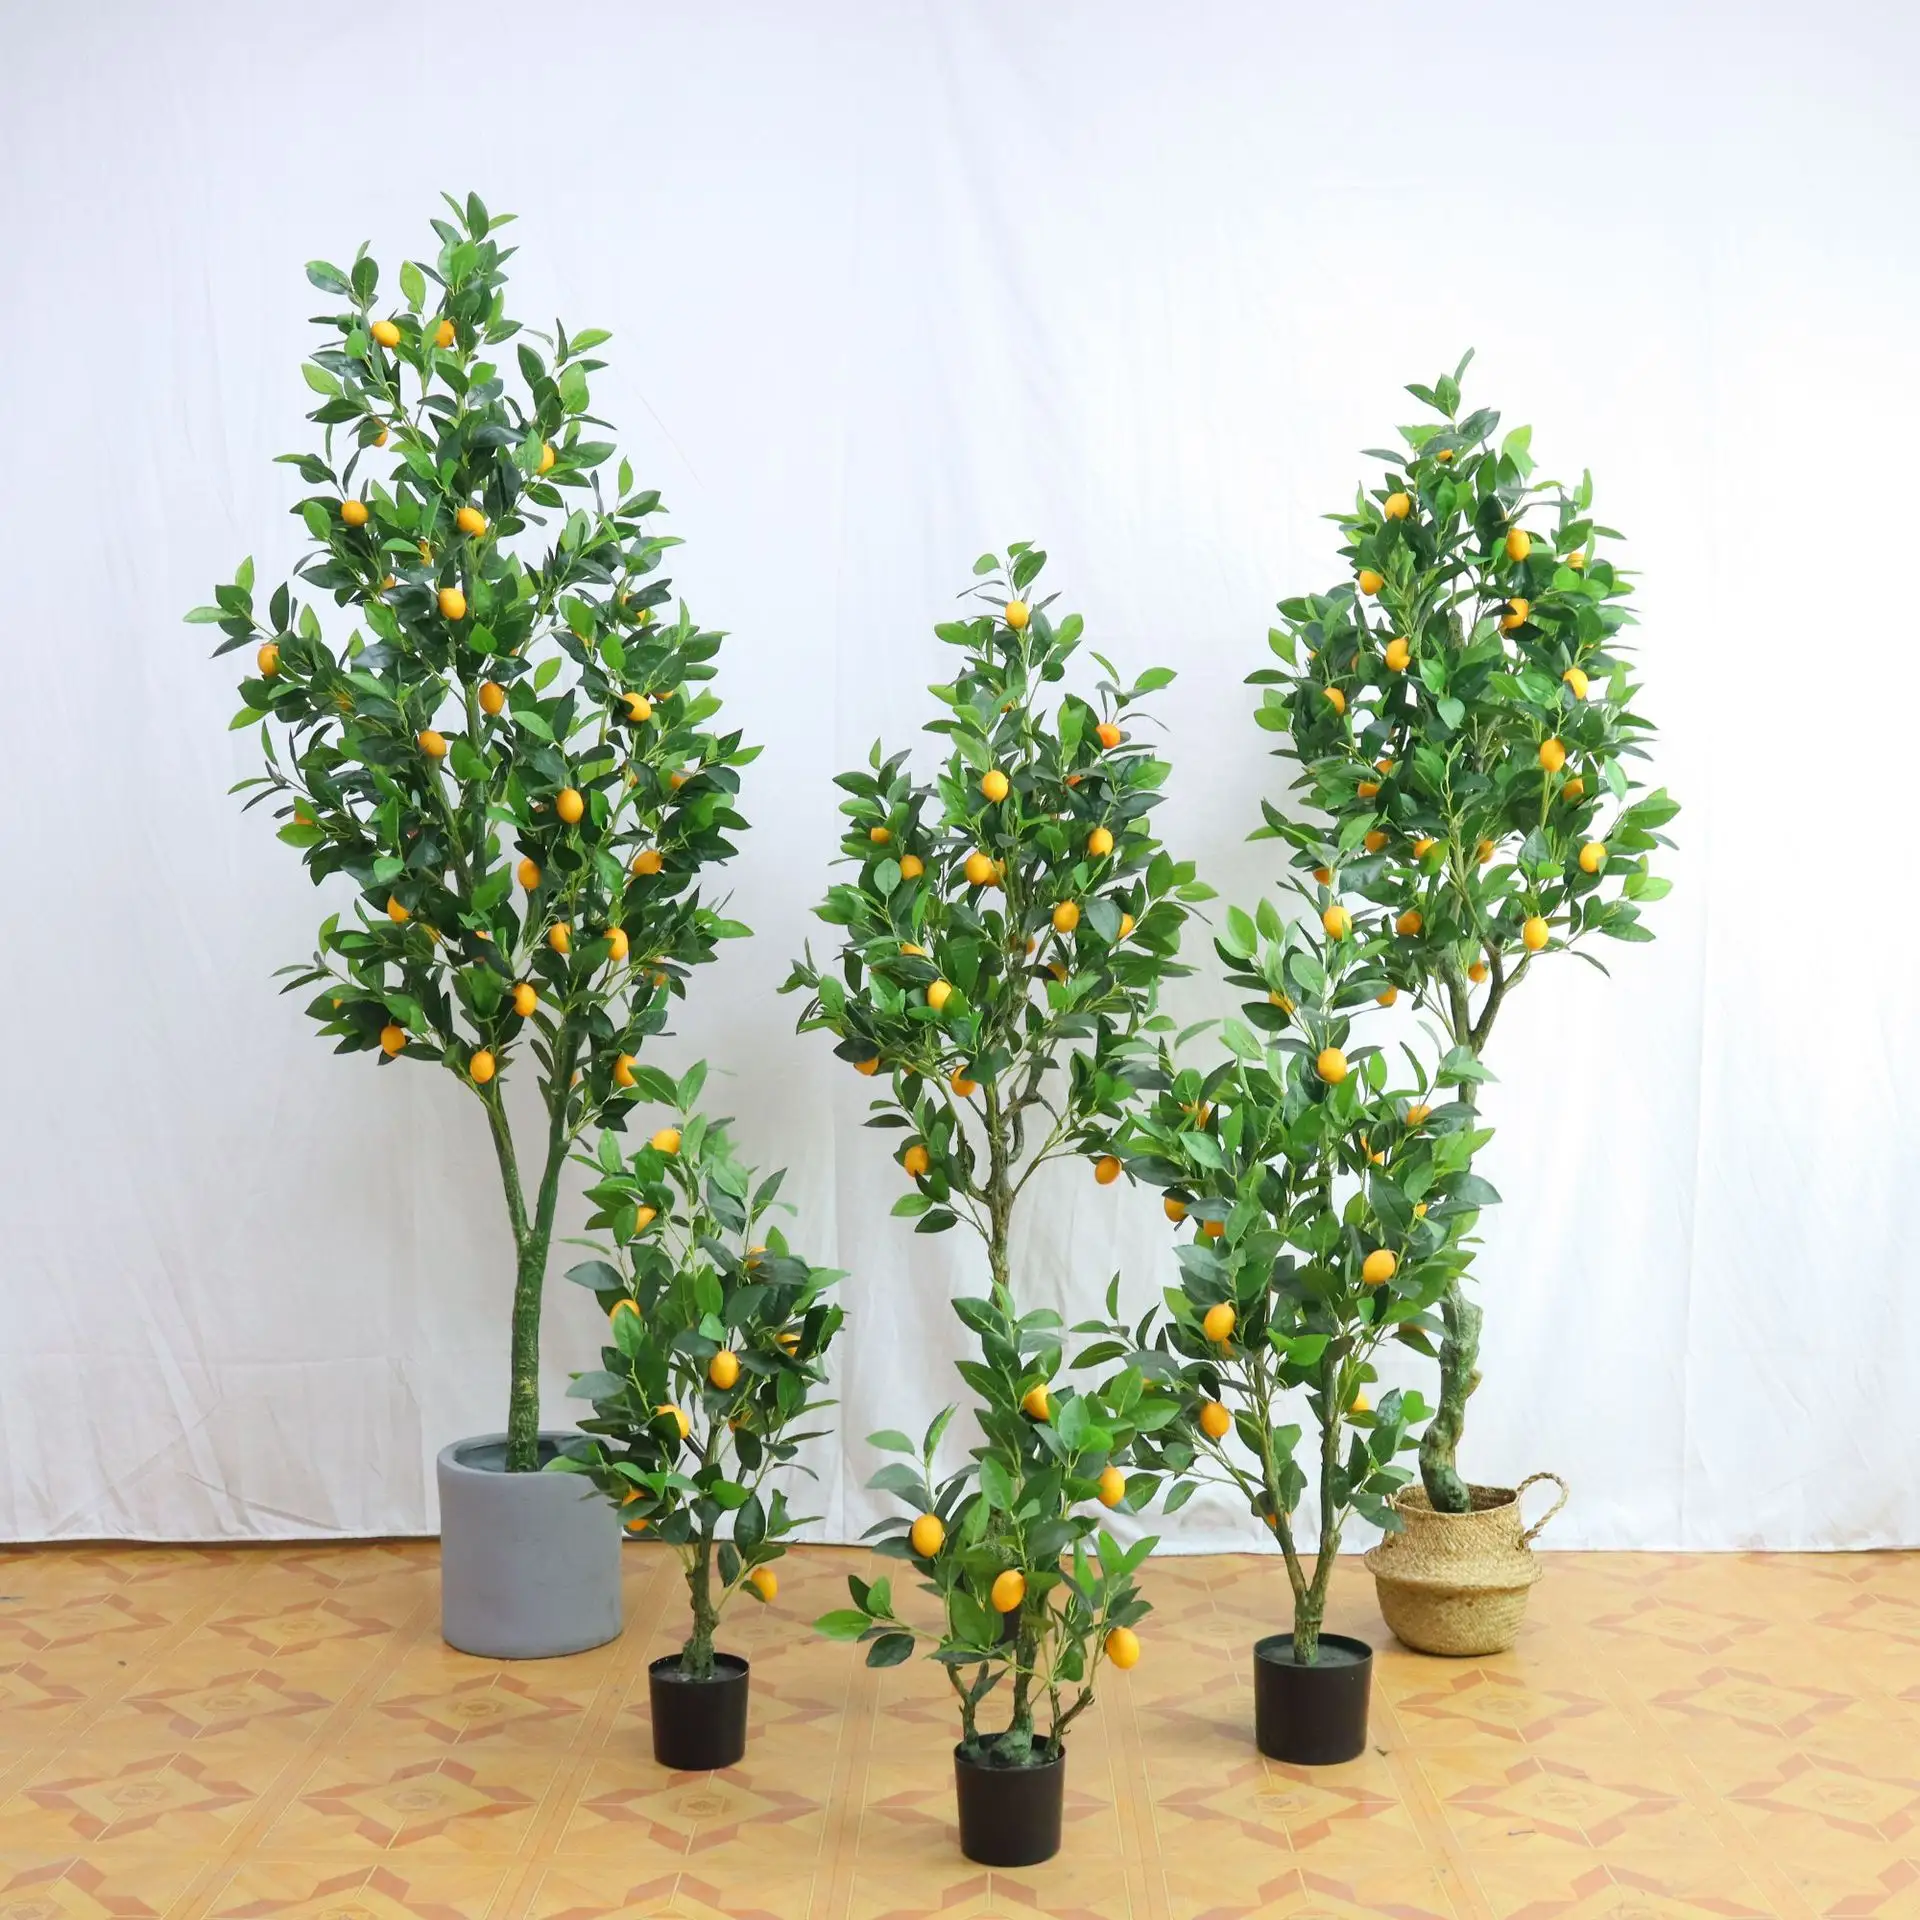 Wholesale of high-quality potted trees for indoor and outdoor decoration artificial lemon trees